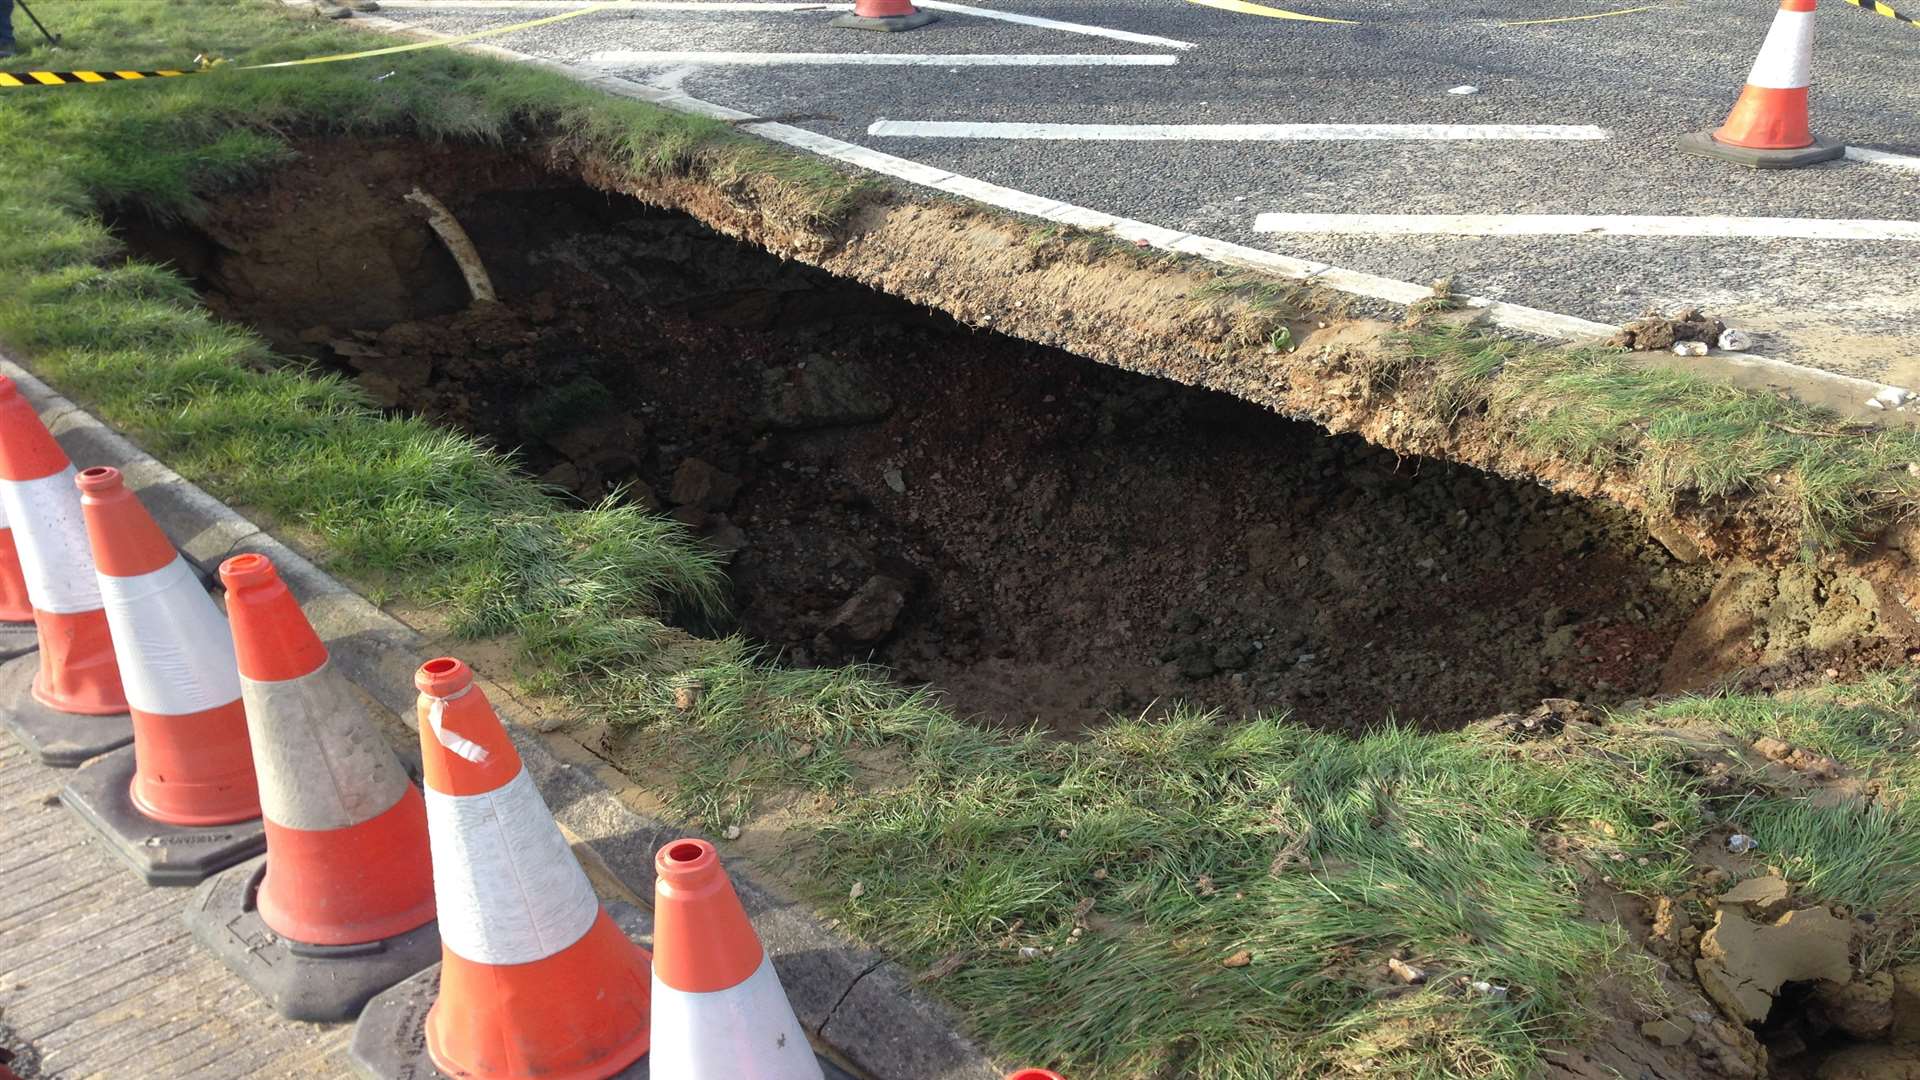 The gaping hole under the road